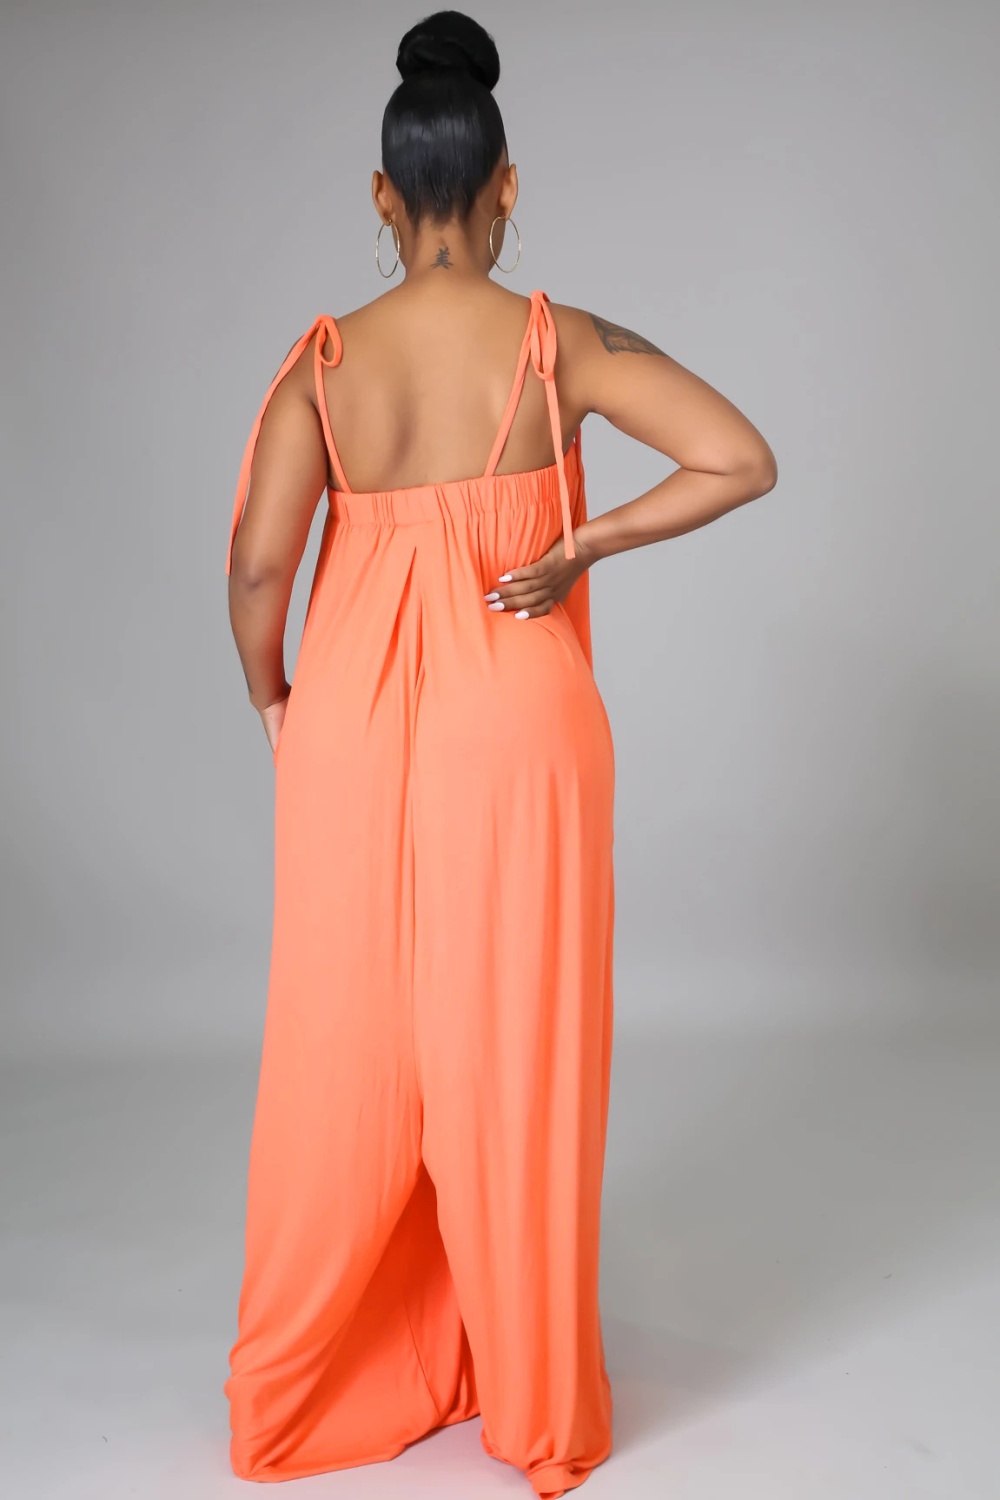 Casual loose European style pure summer jumpsuit